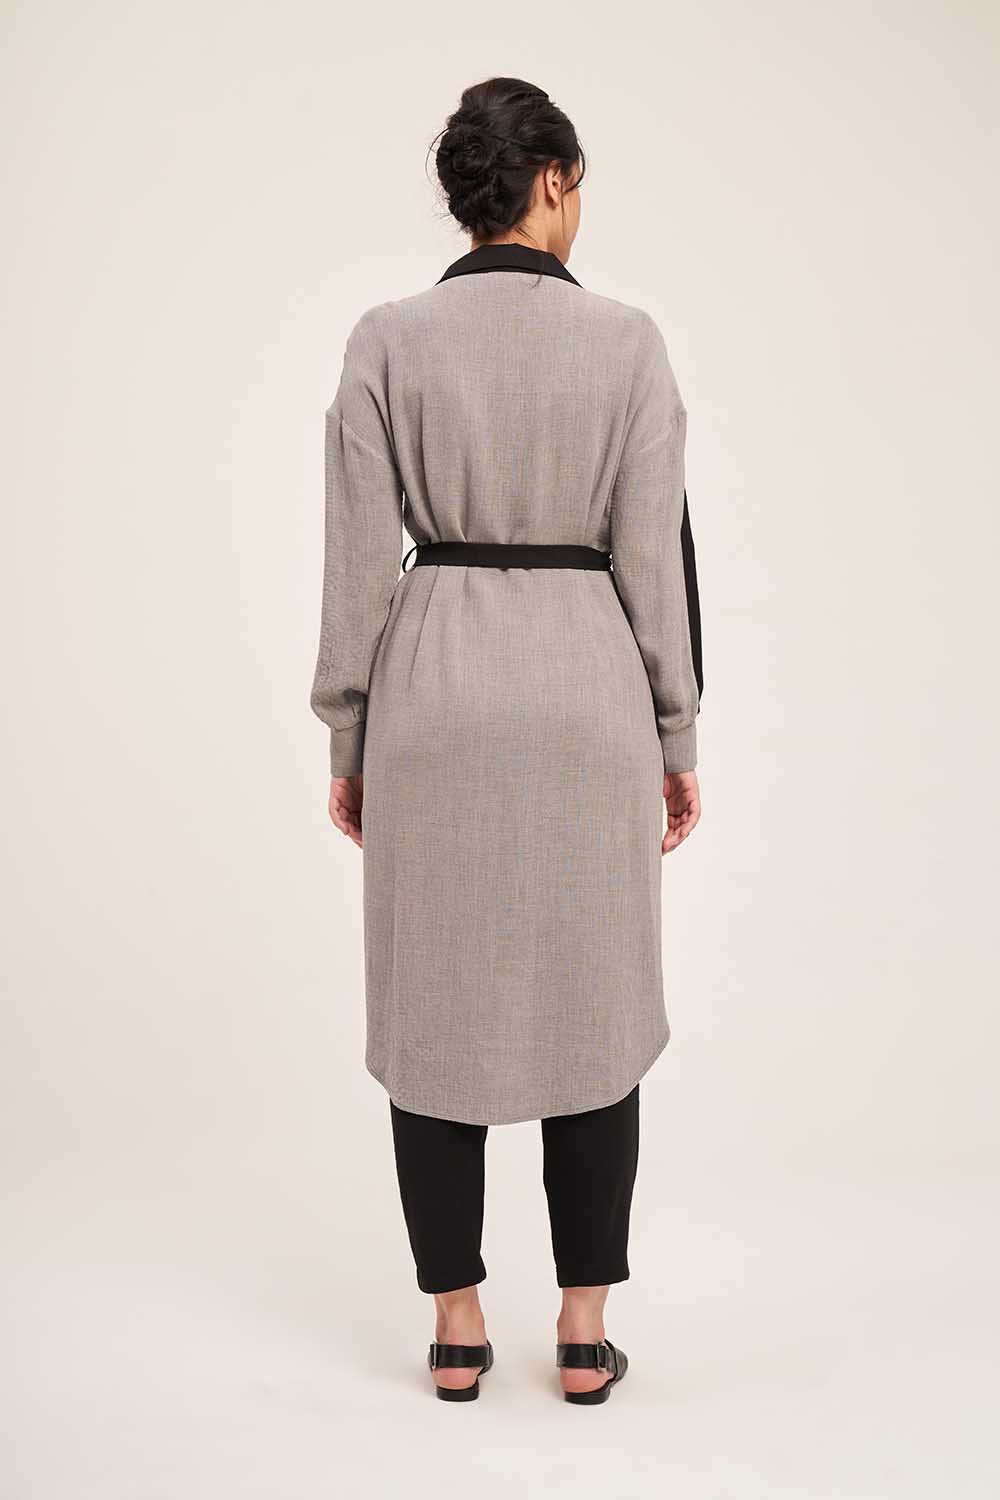 Double Colored Tunic Dress (Grey/Black) 